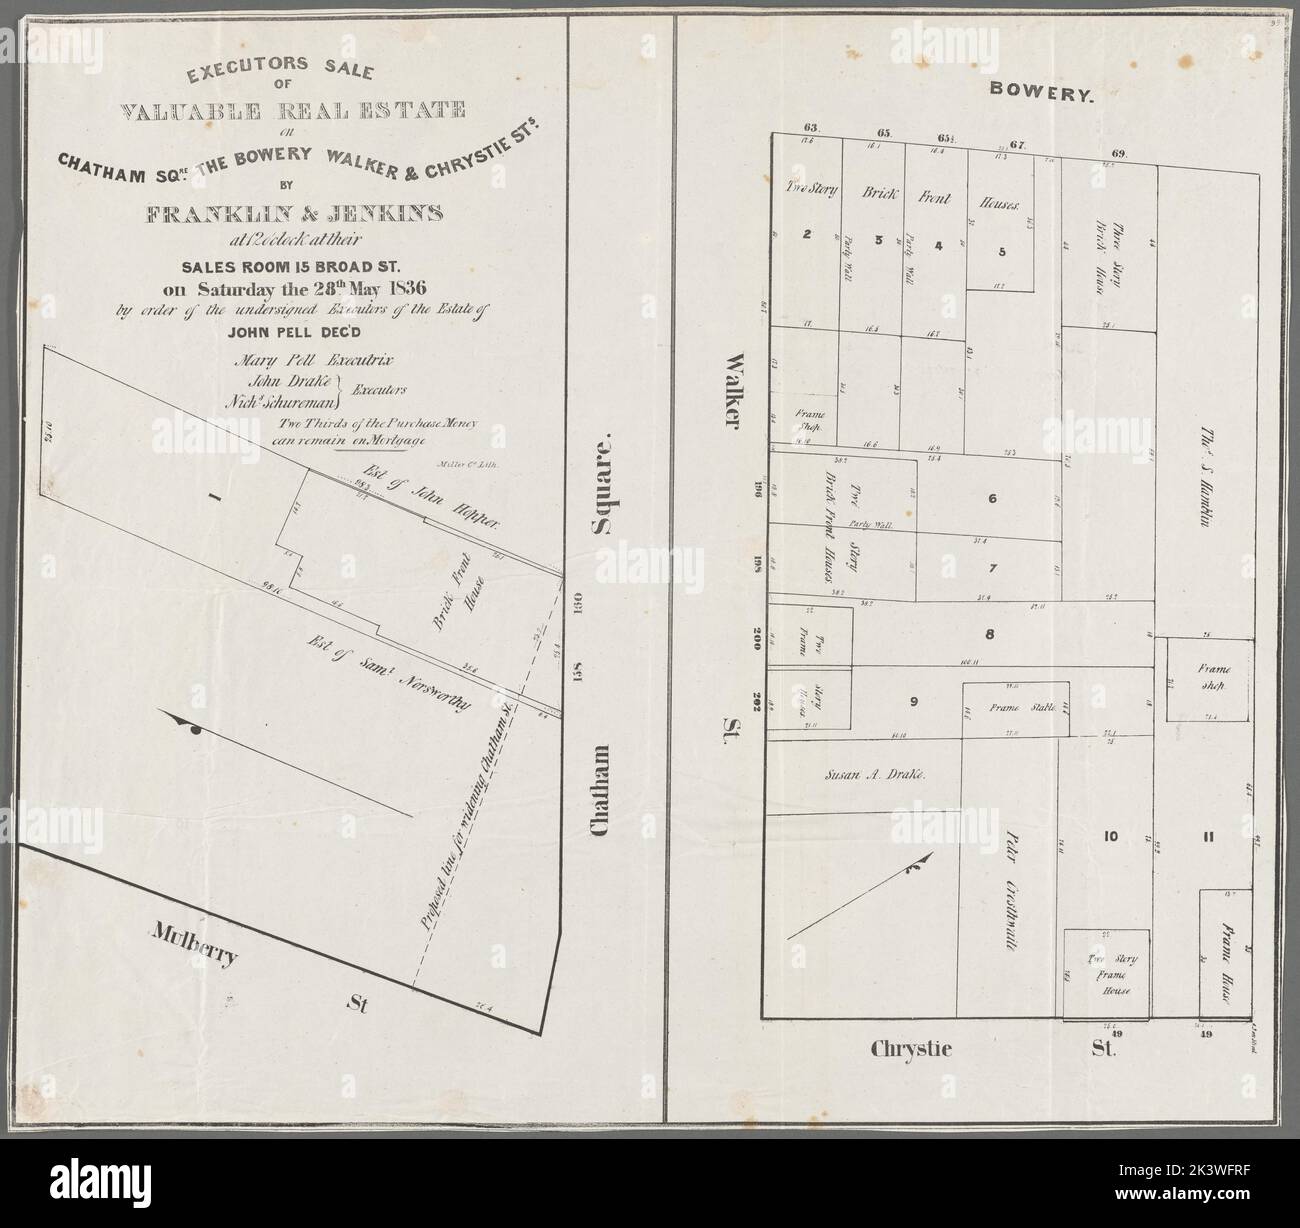 Executors sale of valuable real estate on Chatham Sqre., The Bowery, Walker & Chrystie Sts., by Franklin & Jenkins at 12 o'clock at their sales room, 15 Broad St., on Satuday the 28th May, 1836, by order of the undersigned executors of the estate of John Pell, decd., Mary Pell, executrix, John Drake, Nichs. Schureman, executors Cartographic. Cadastral maps, Maps. 1836. Lionel Pincus and Princess Firyal Map Division. United States , New York (State) , New York, Landowners , New York (State) , New York, Real property , New York (State) , New York, Real propery auctions , New York (State) , New Y Stock Photo